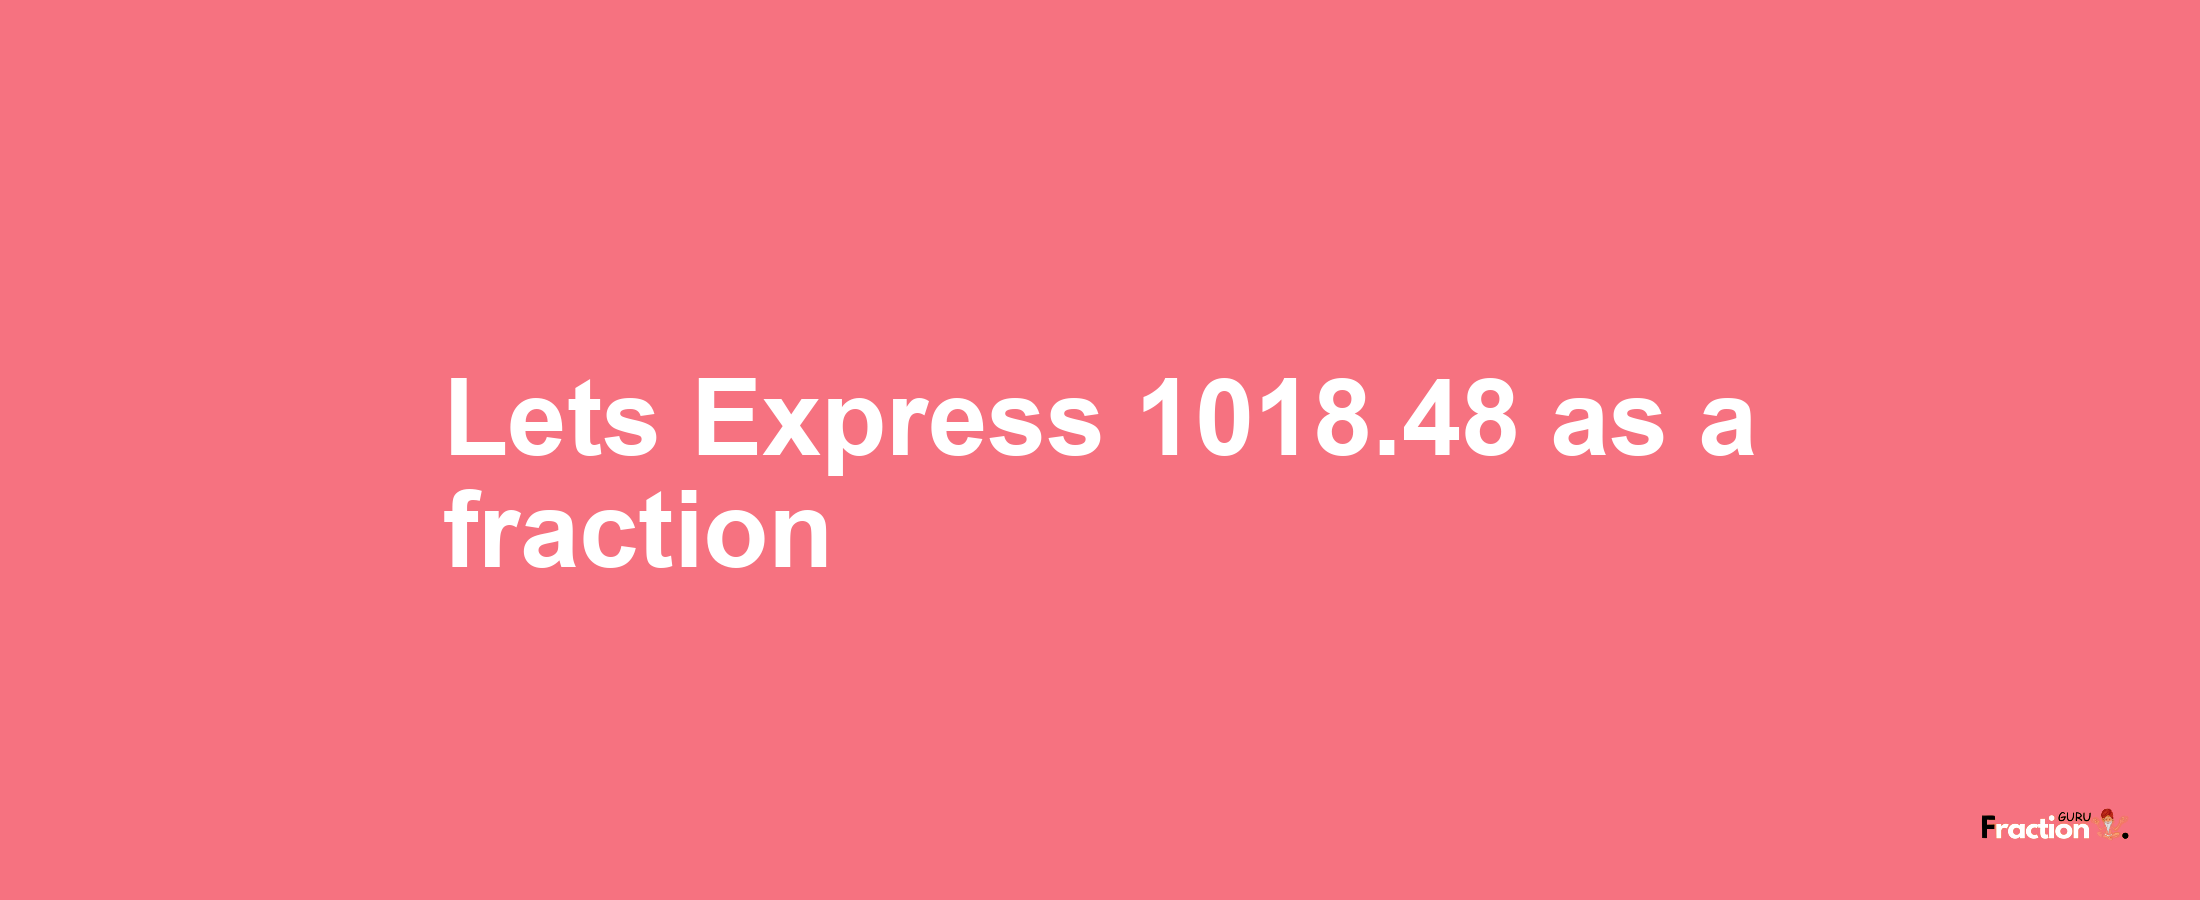 Lets Express 1018.48 as afraction